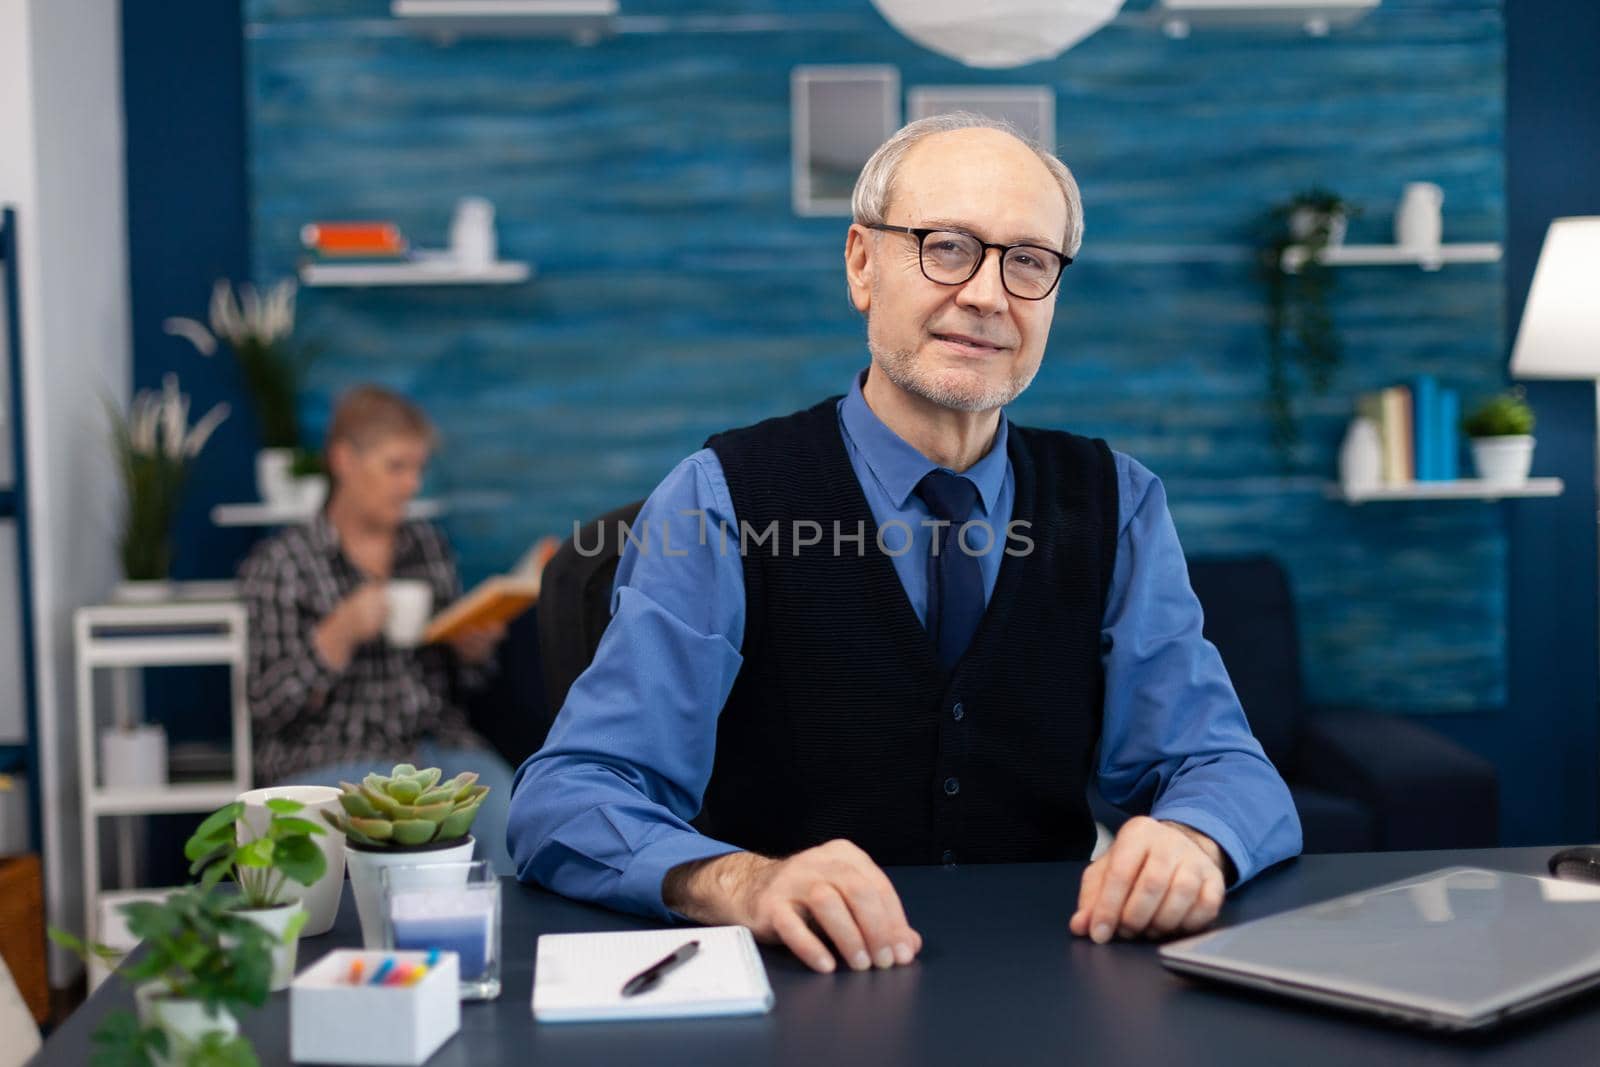 Adult man with gray hair looking pensive by DCStudio